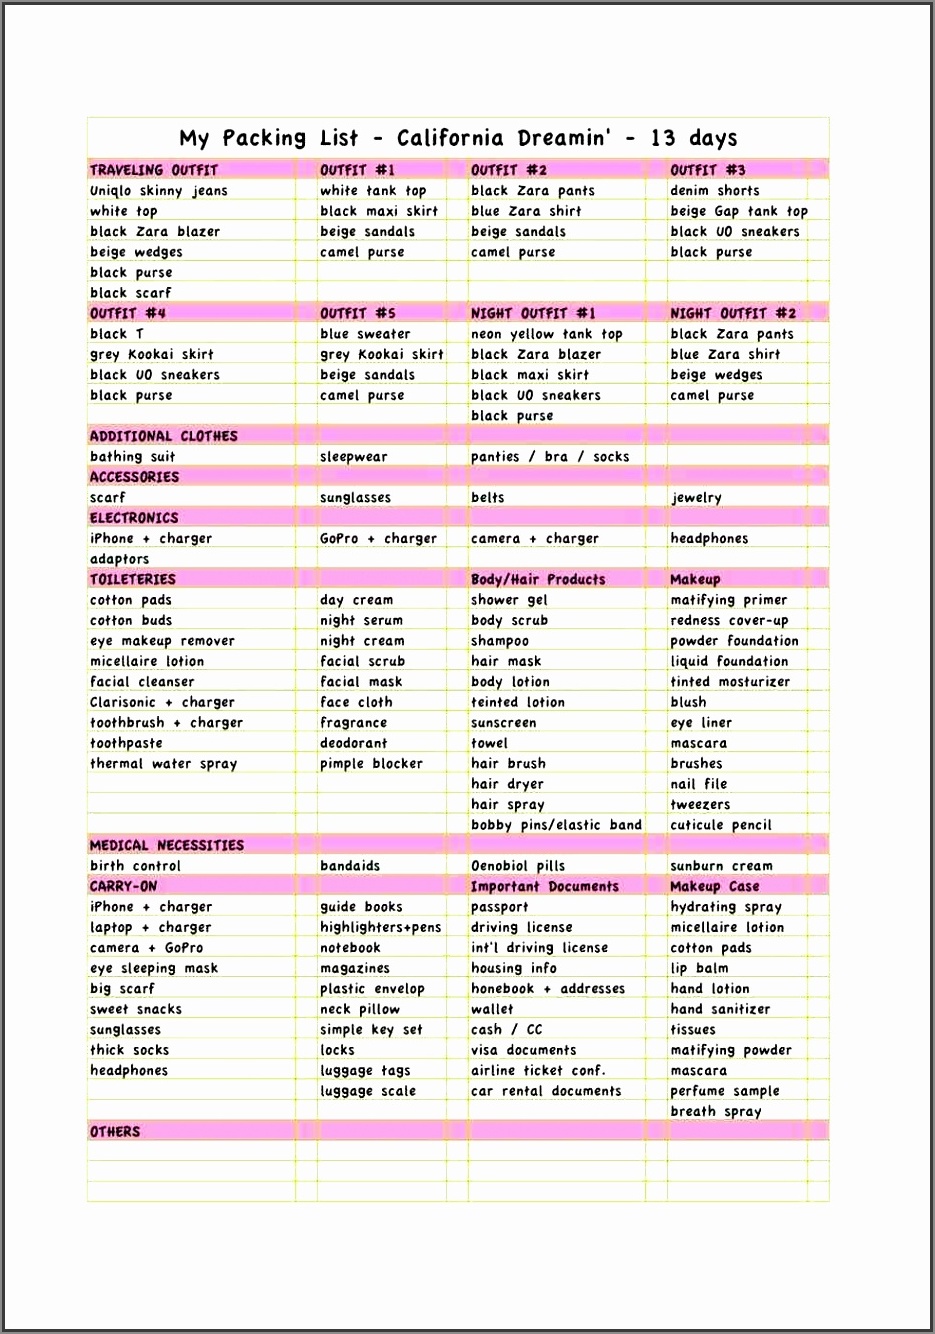 moving packing list template